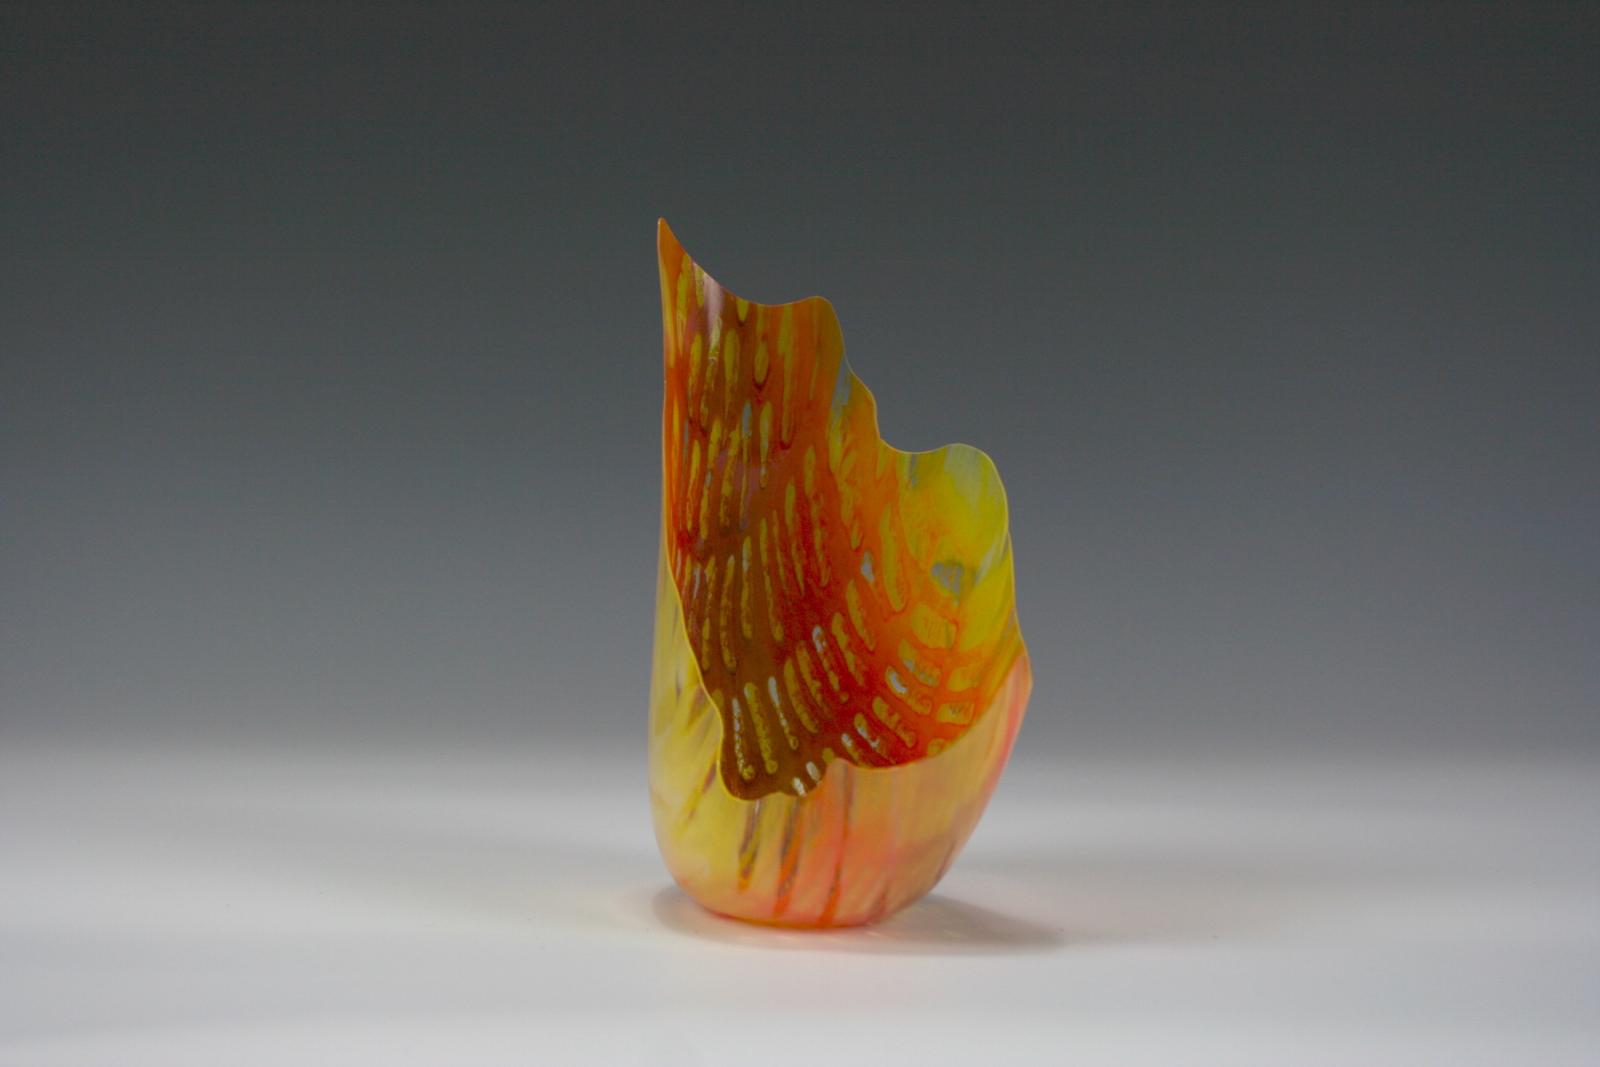 This piece is an orange, yellow and red thin-walled drop vessel with an amorphous edge. This piece was inspired by the vibrant colors and textures of torch lily flowers I saw at a botanical garden in Australia.